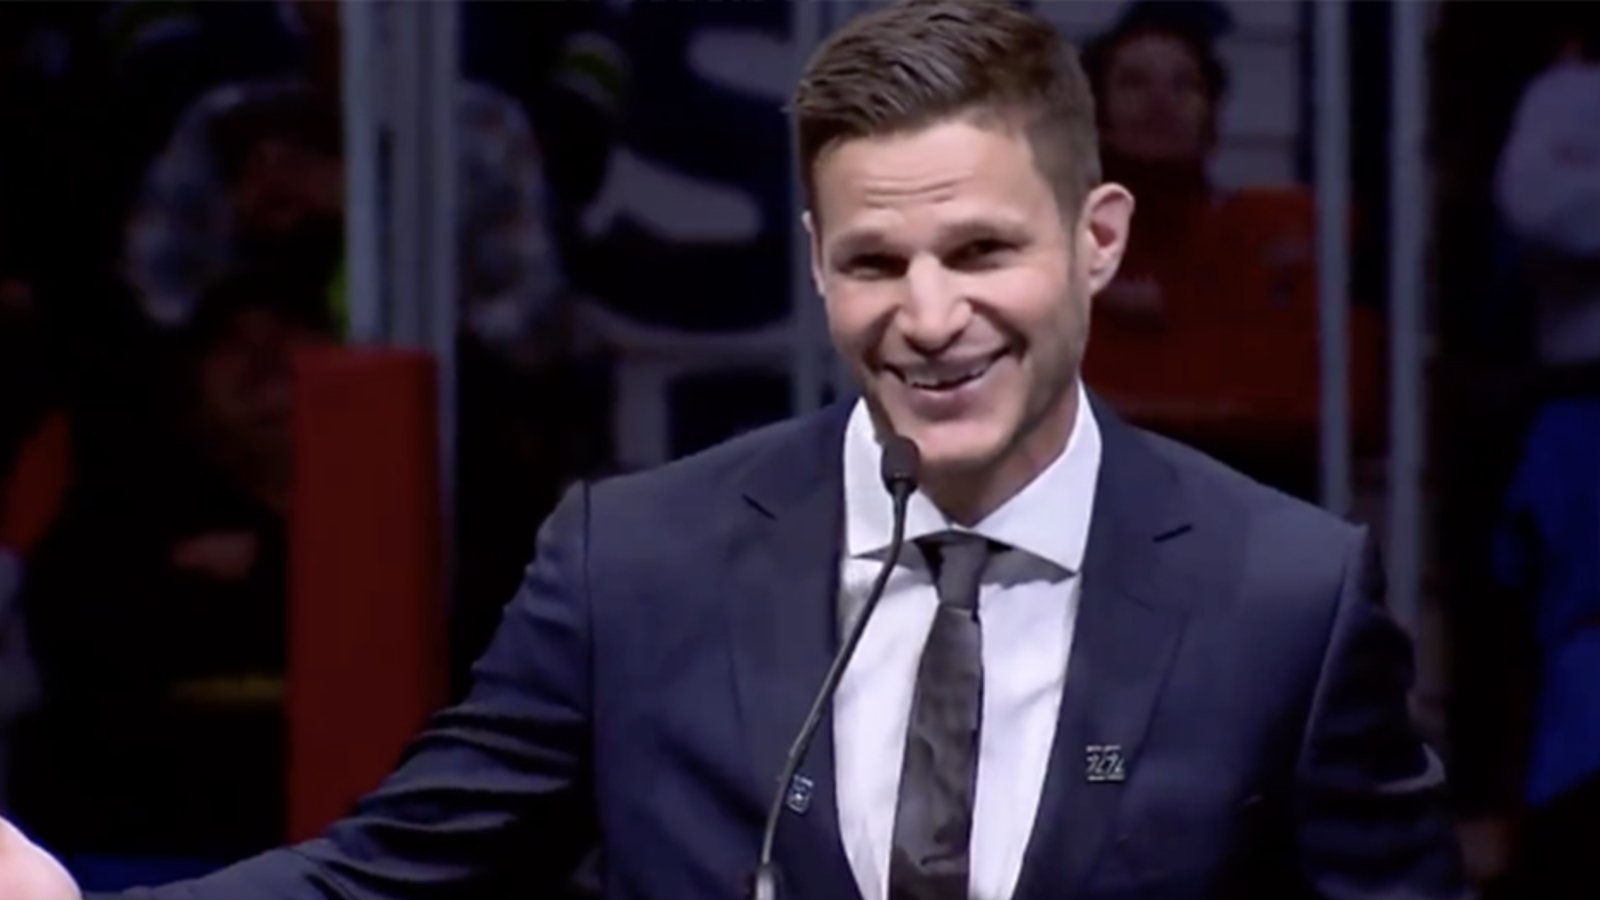 Bieksa steals the show with incredible roast at Sedins retirement ceremony